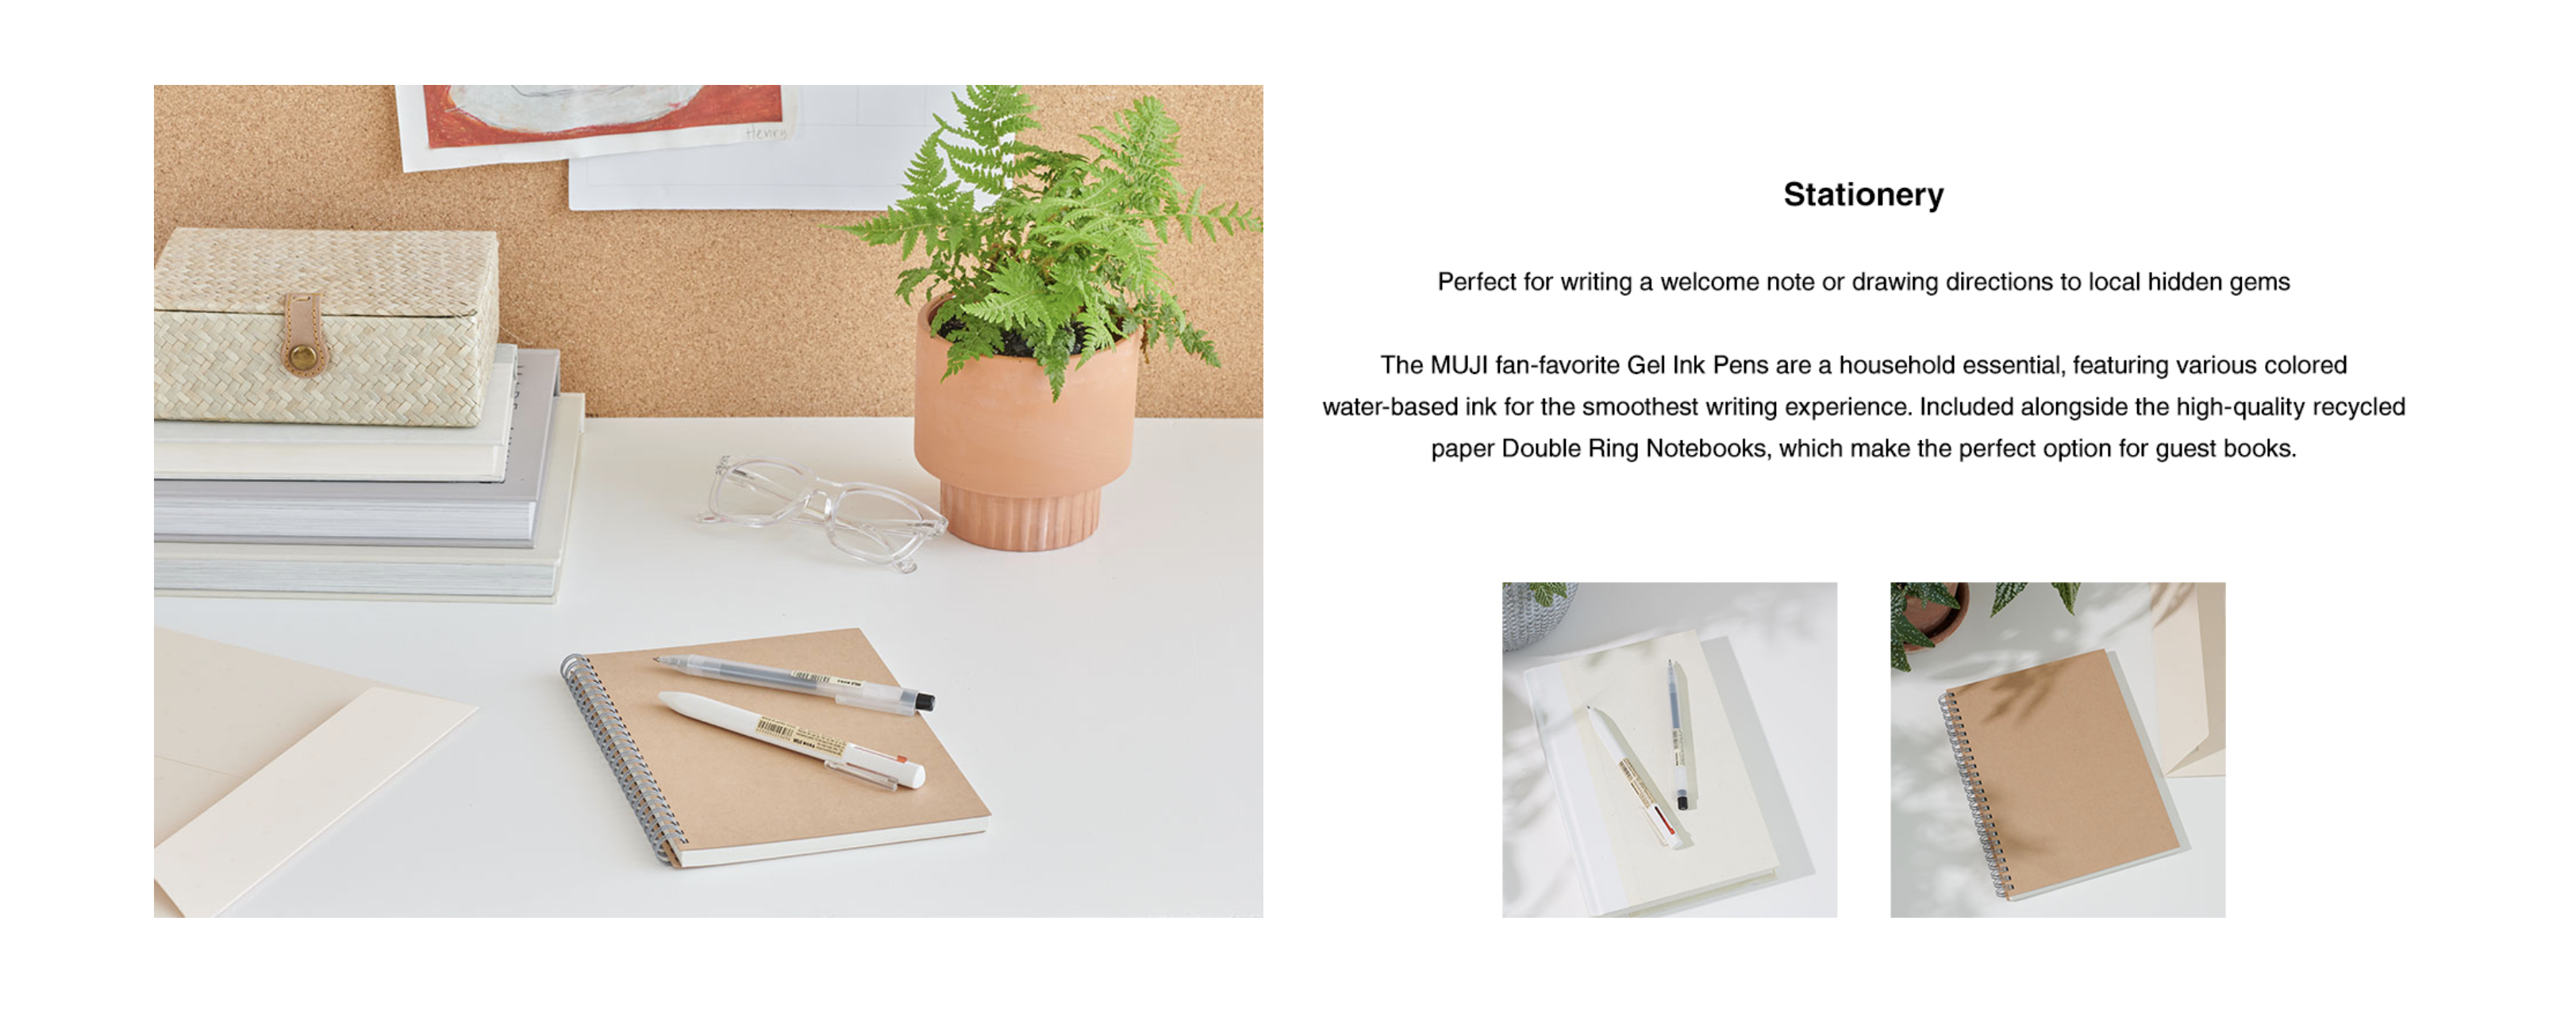 Air bnb and muji ad of sesk products by Alison Gootee Photography